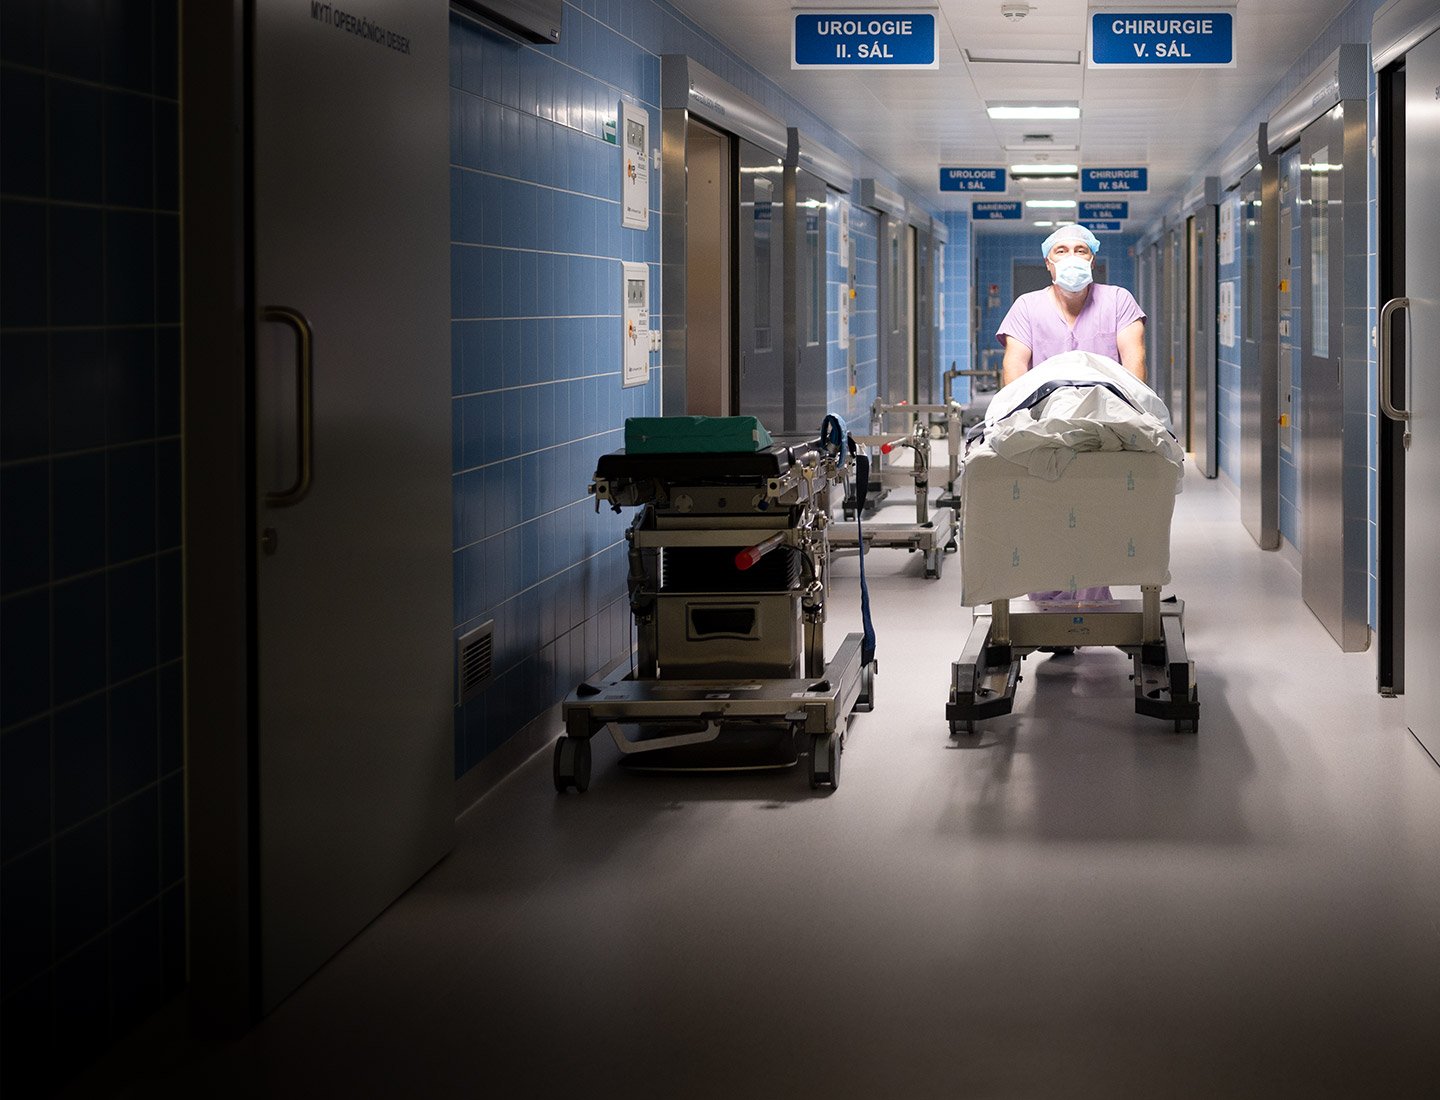 Nurse in full protective clothing pushing patient’s bed through hospital corridor